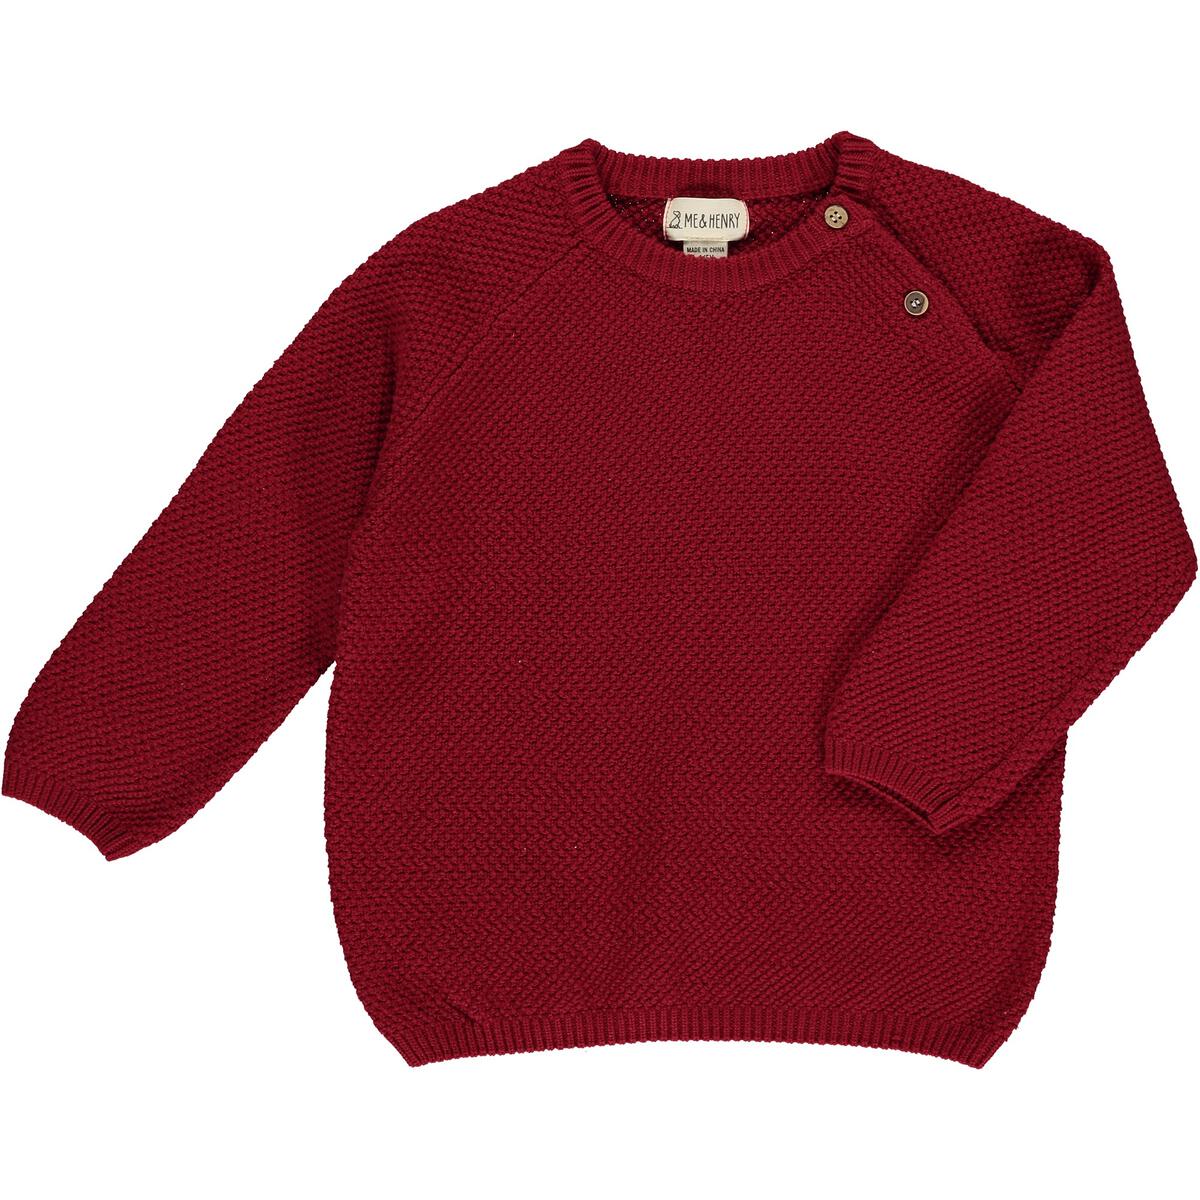 Roan Sweater in Red